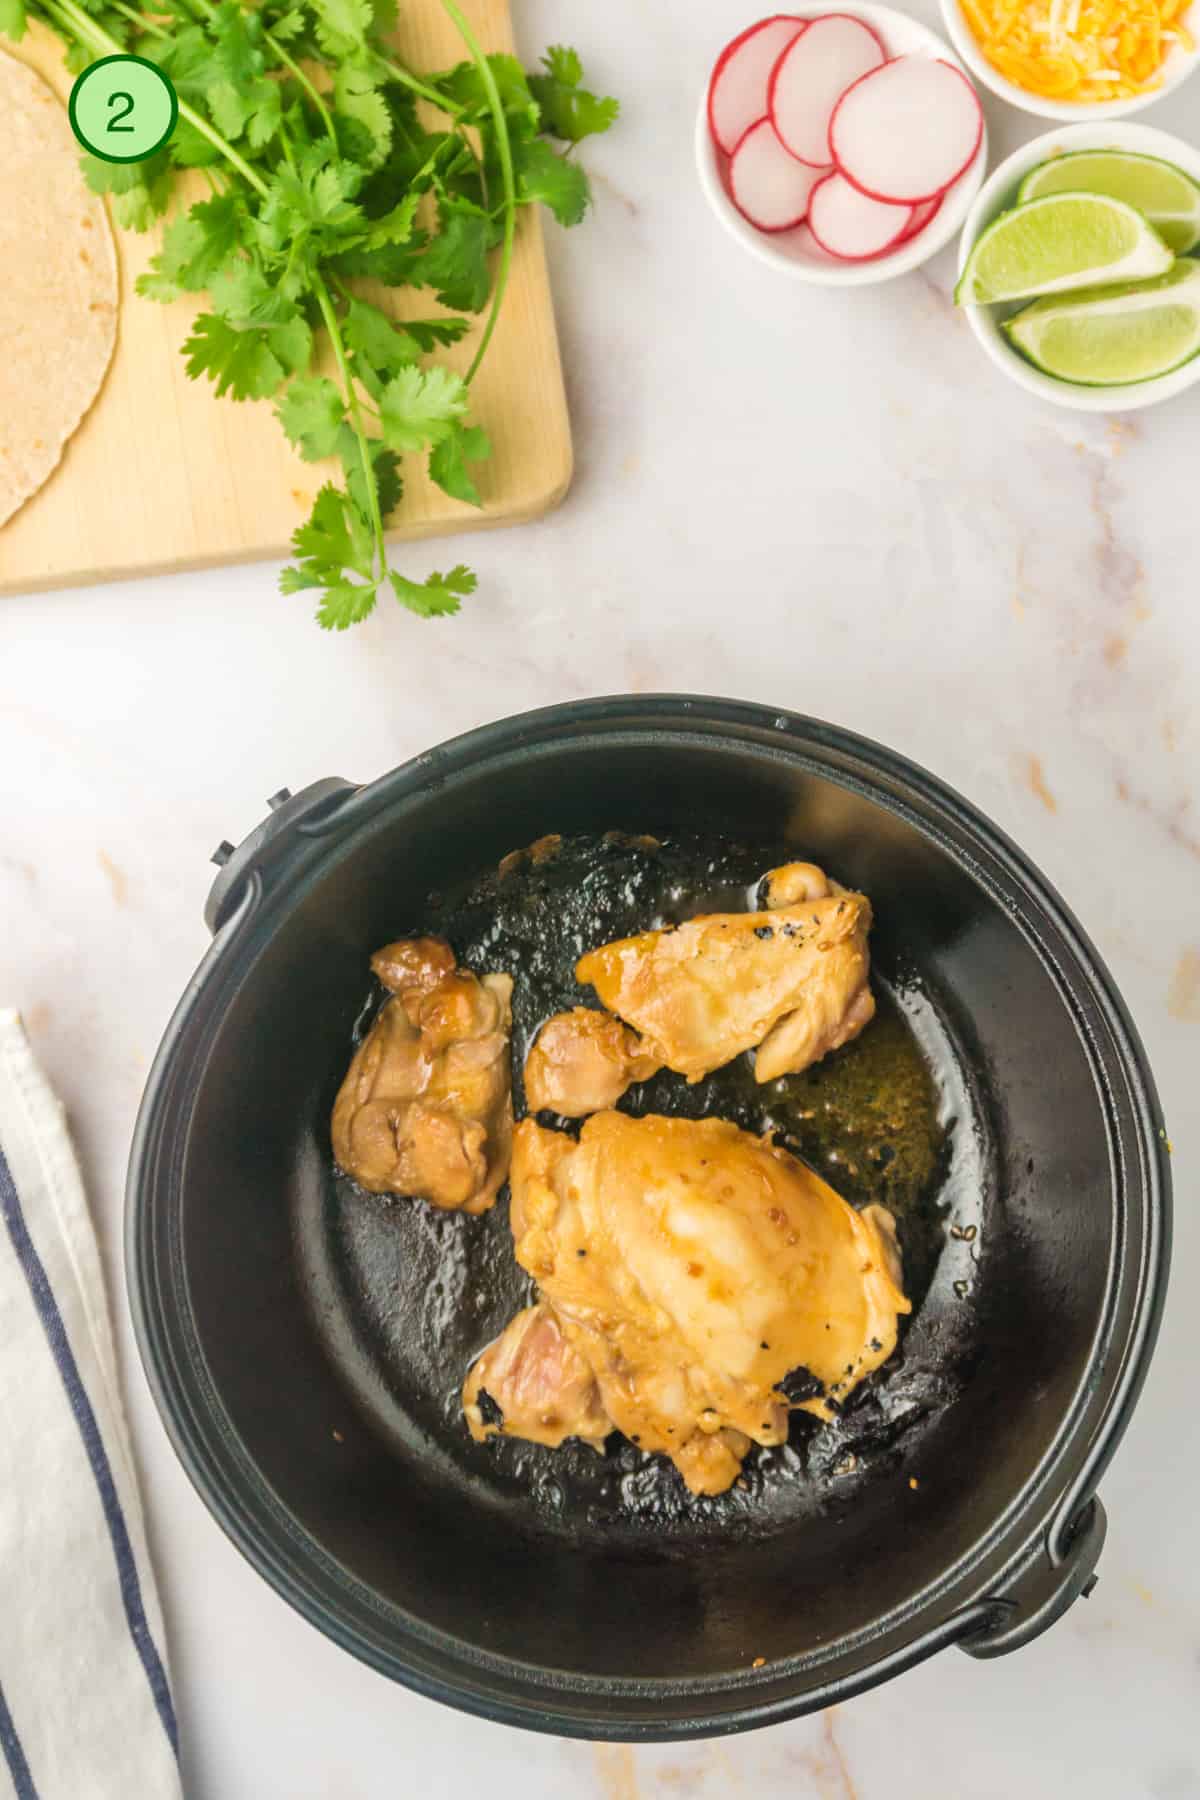 Cooking the chicken in a cast iron skillet.